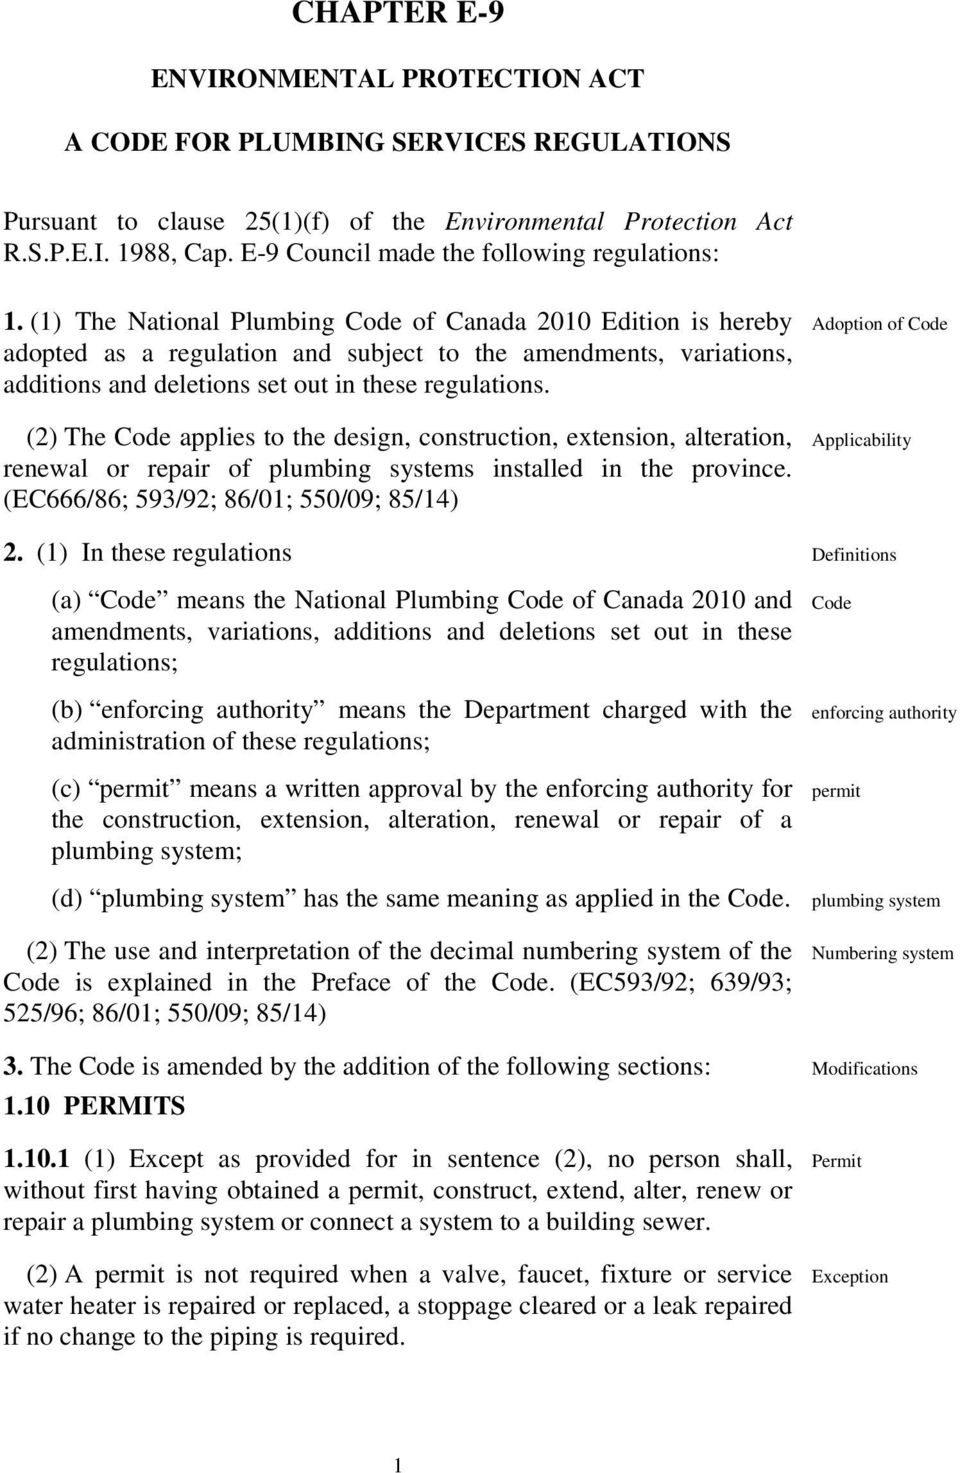 (1) The National Plumbing Code of Canada 2010 Edition is hereby adopted as a regulation and subject to the amendments, variations, additions and deletions set out in these regulations.